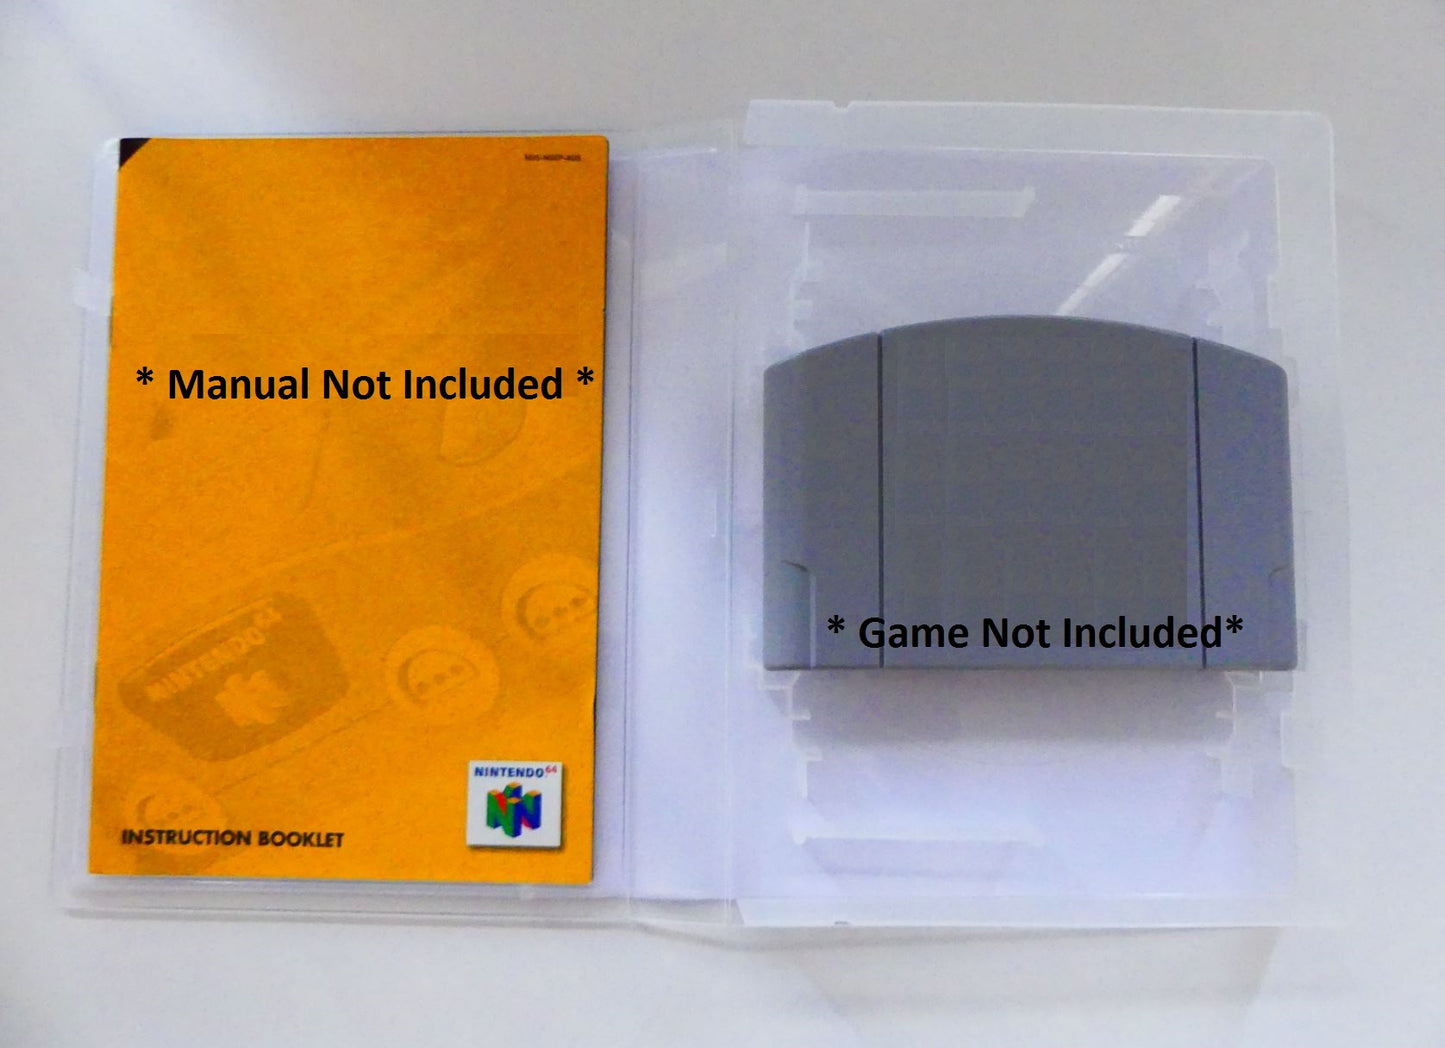 WWF Attitude - N64 Replacement Case